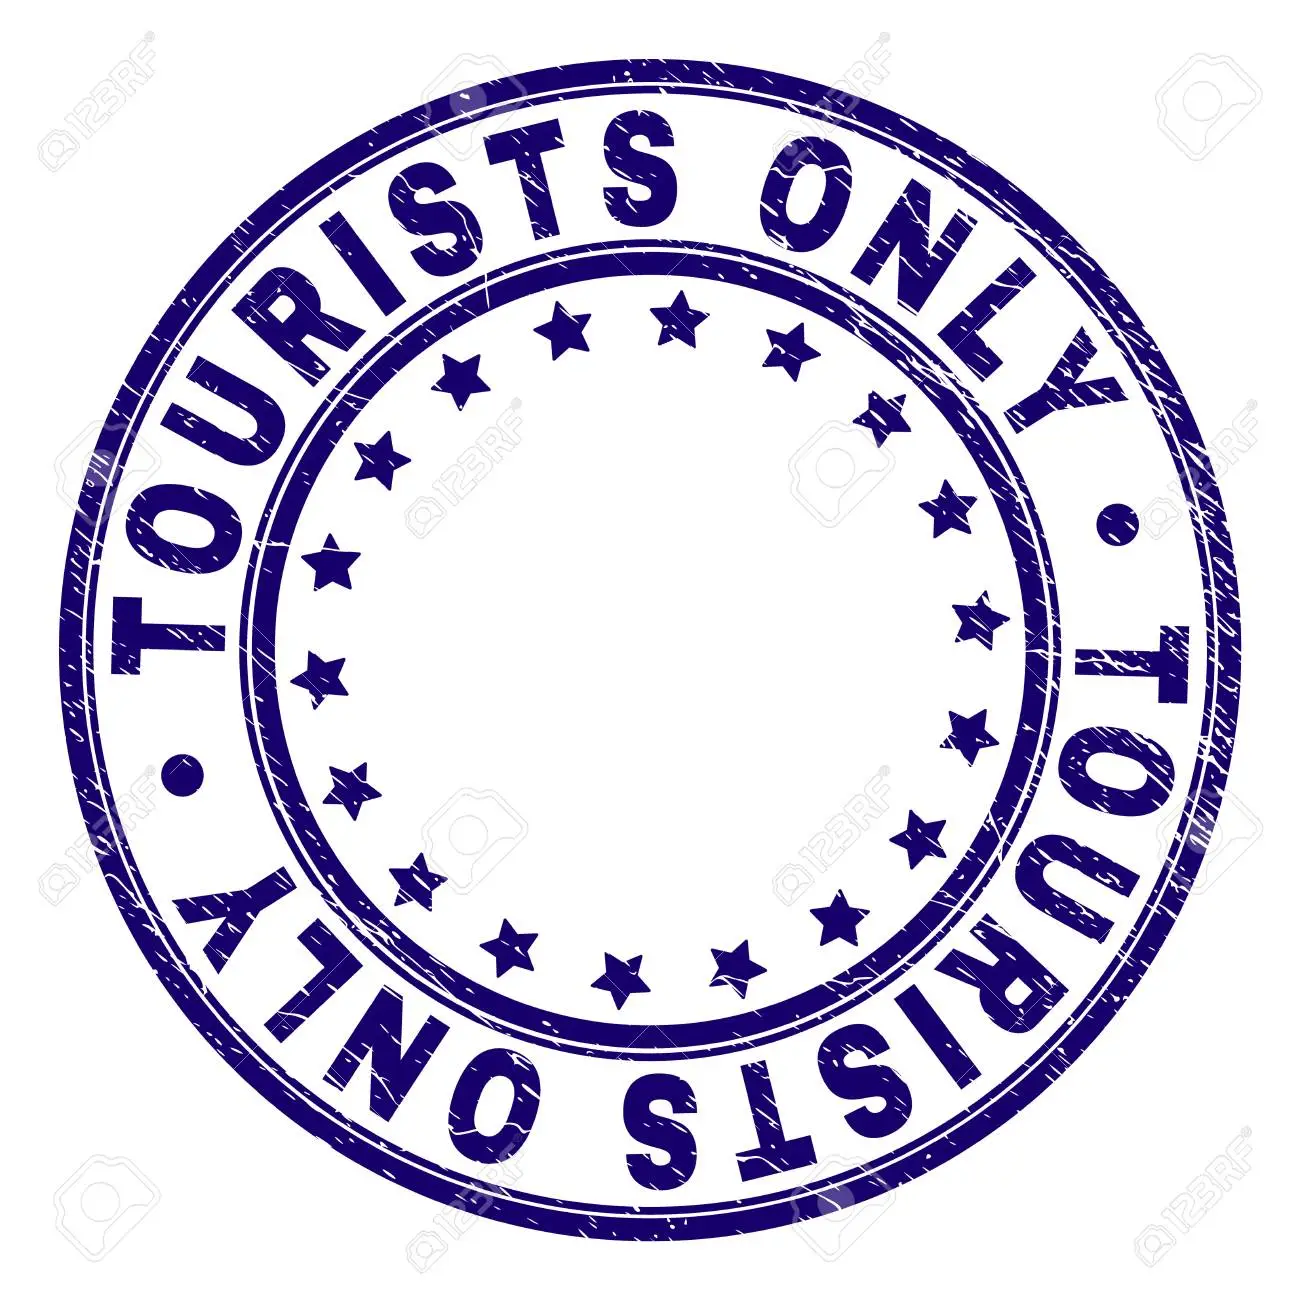 Tourist establishments with a ‘Foreigners Only’ policy will face license cancellation